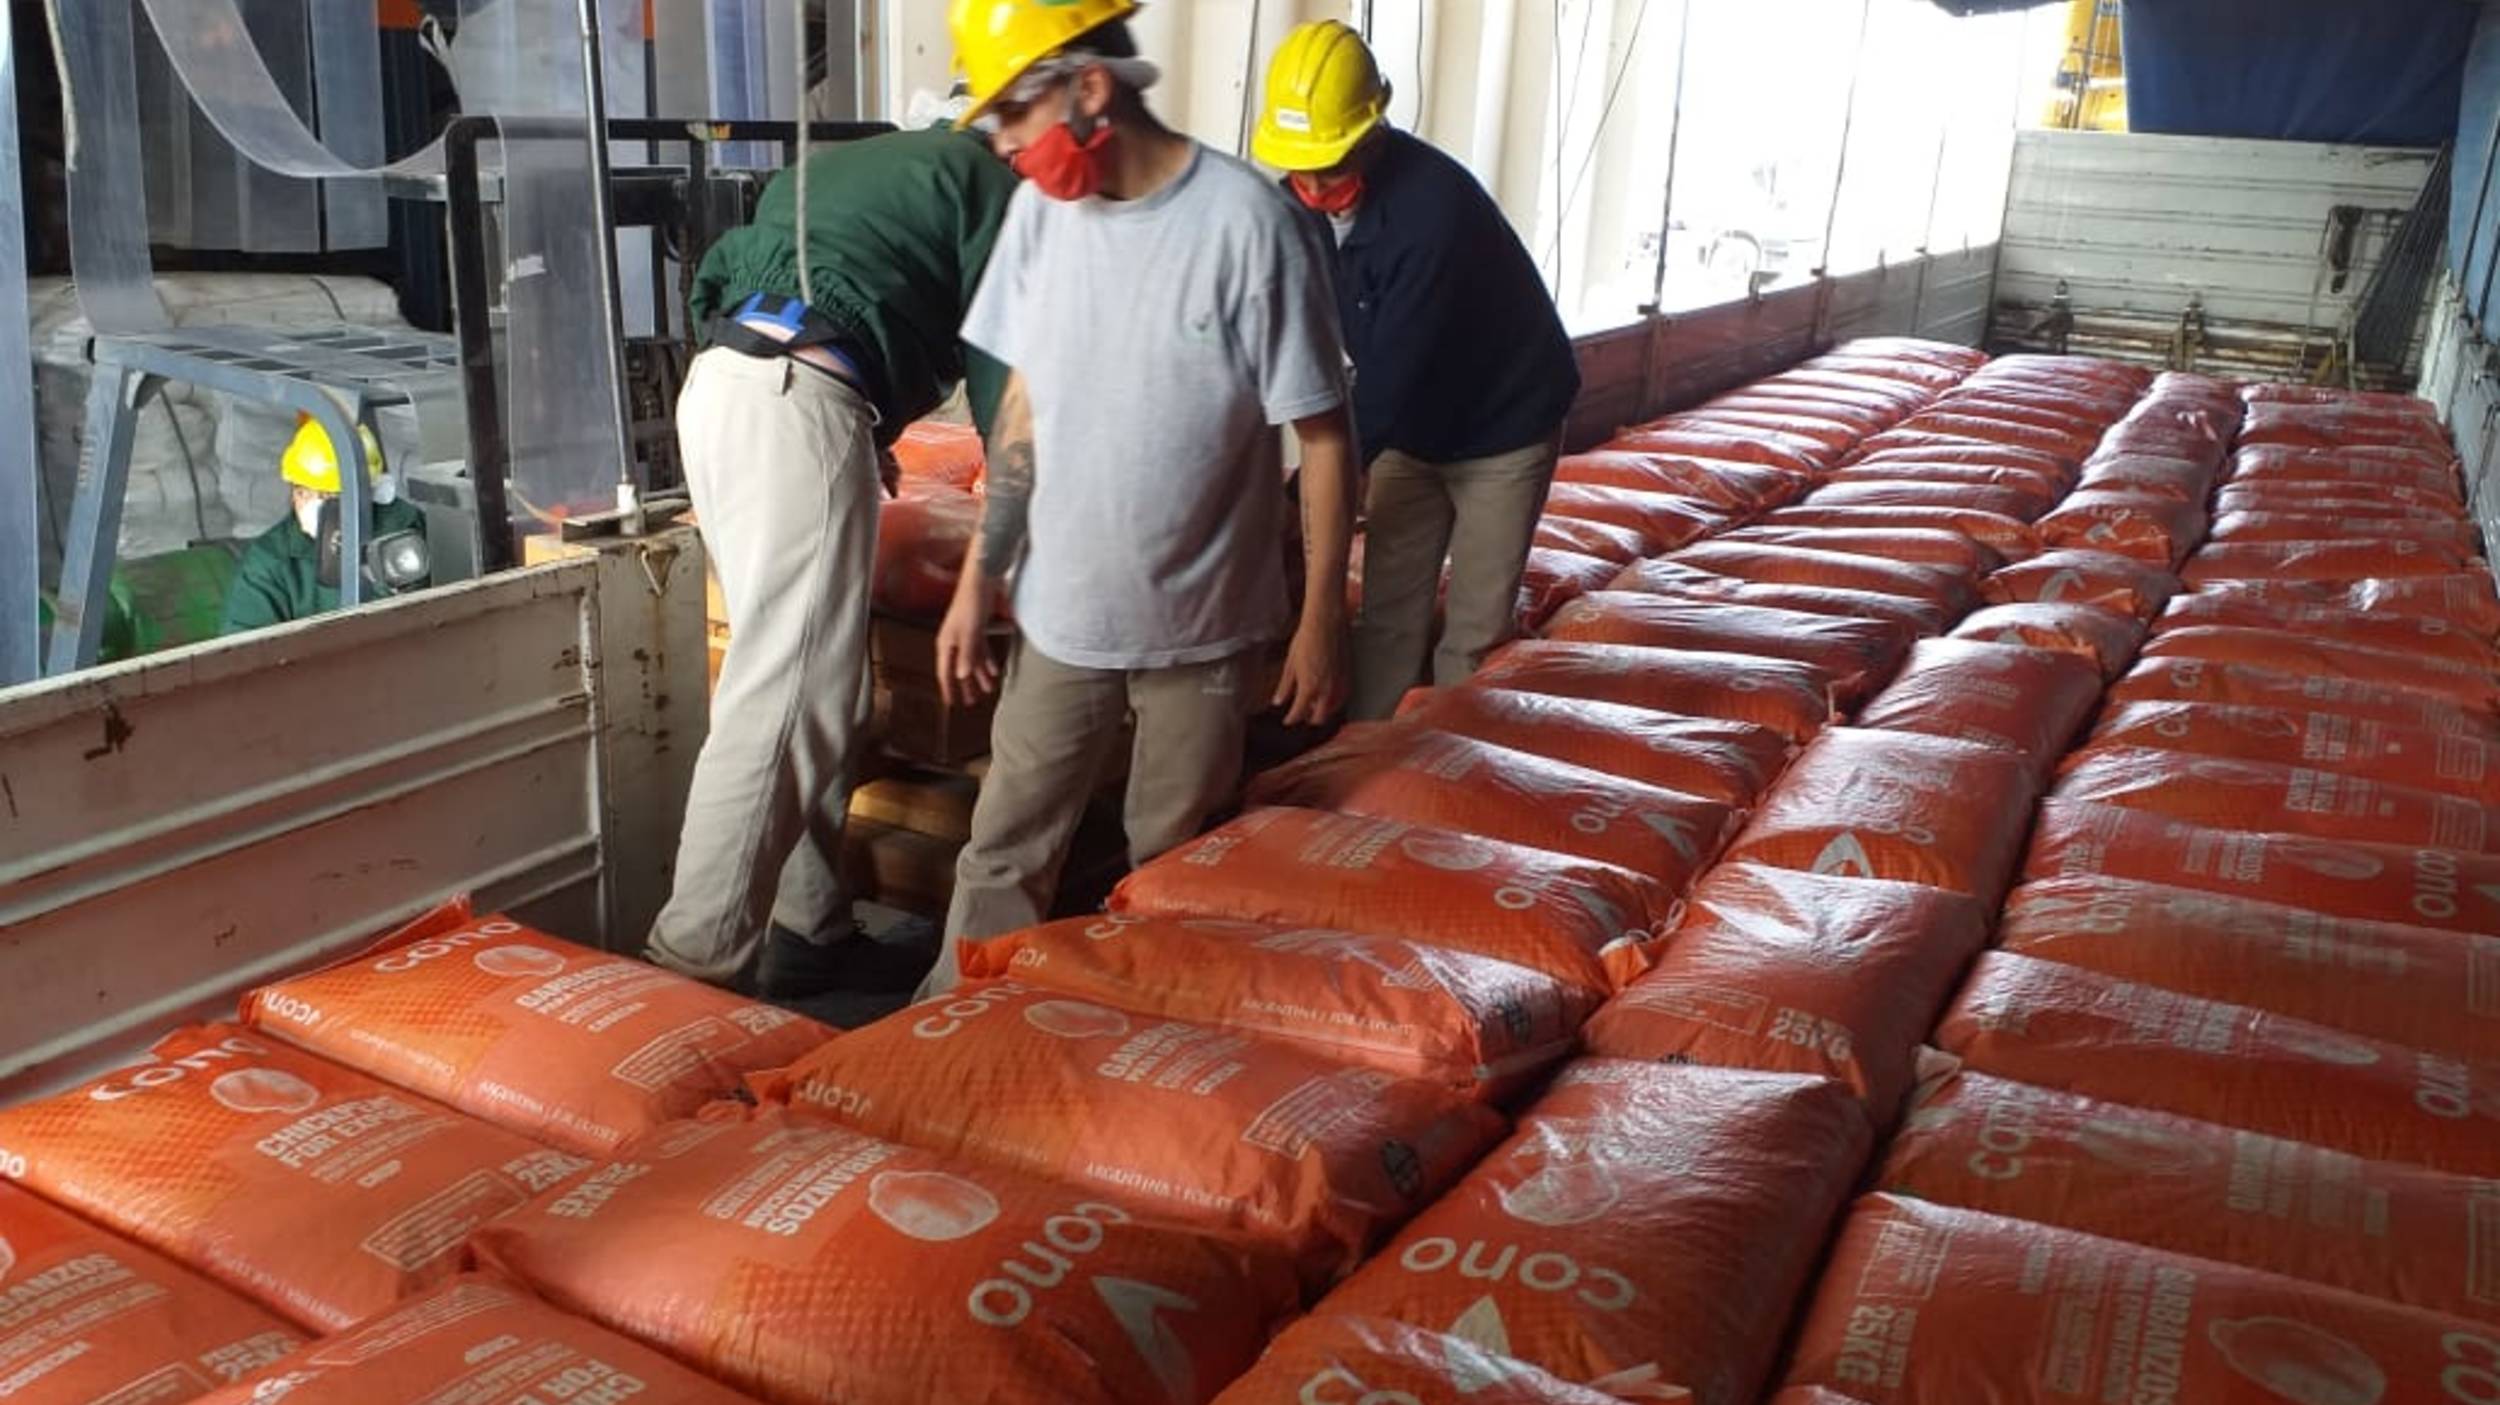 Cono donated more than 1 million food rations in 2020.